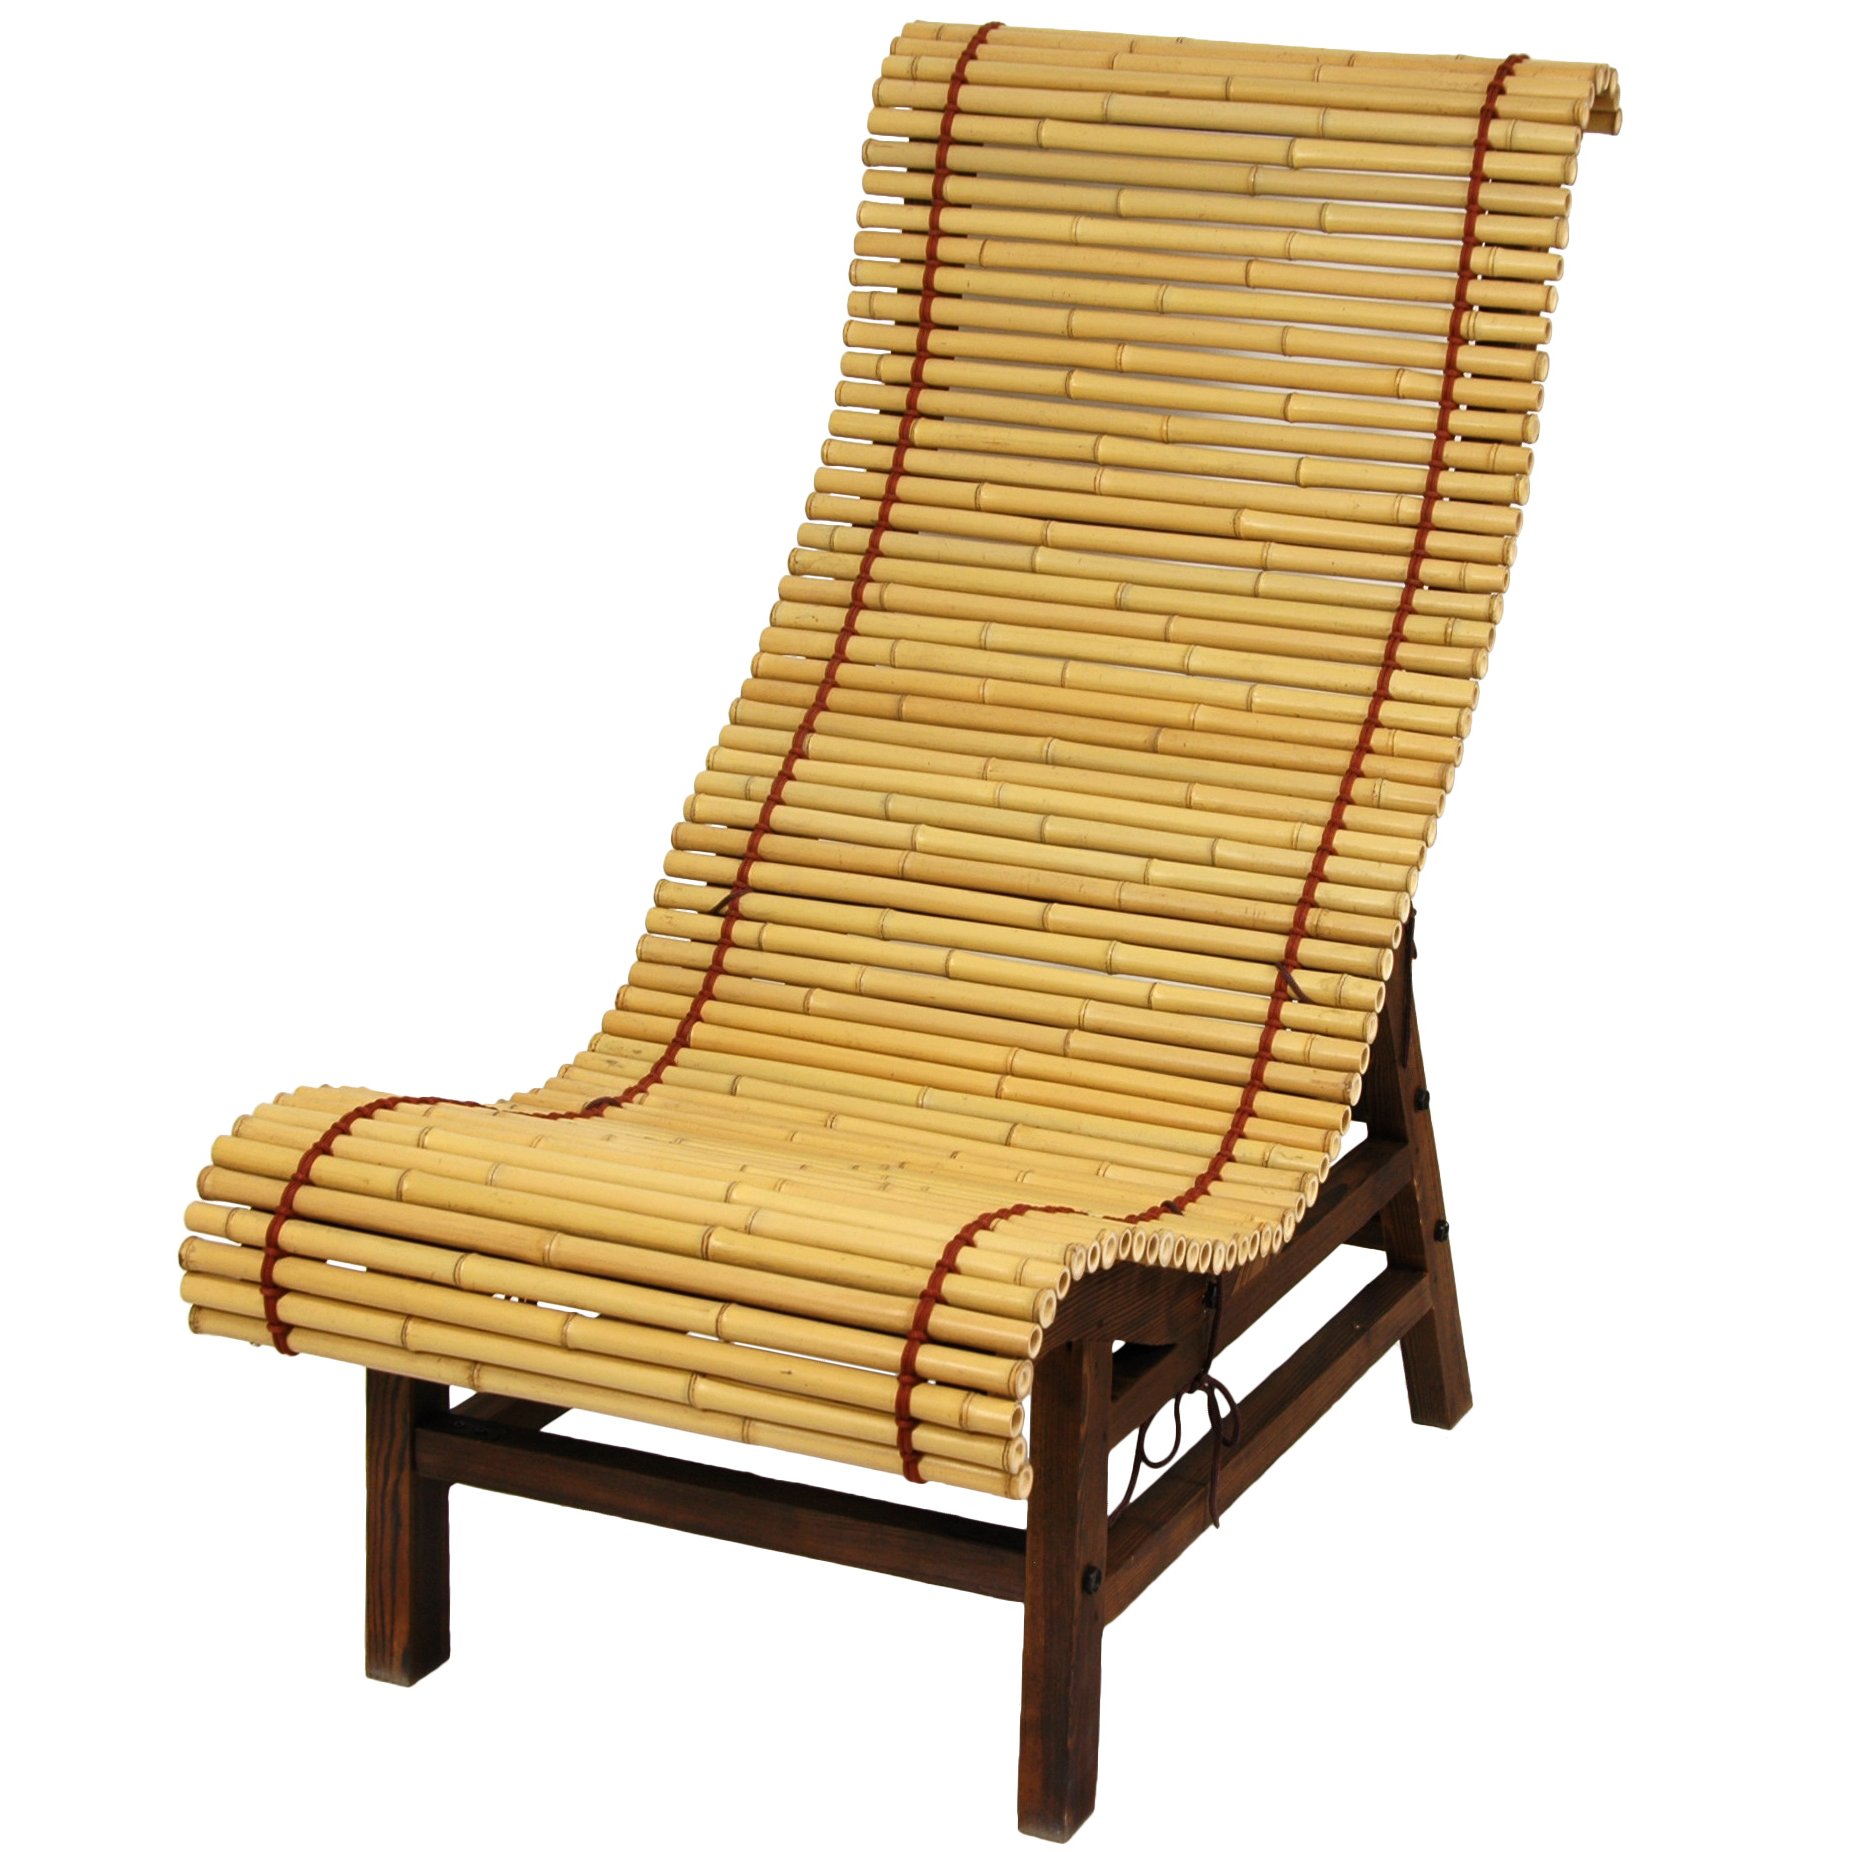 Buy Curved Japanese Bamboo Lounge Chair Online (WD99091) | Satisfaction